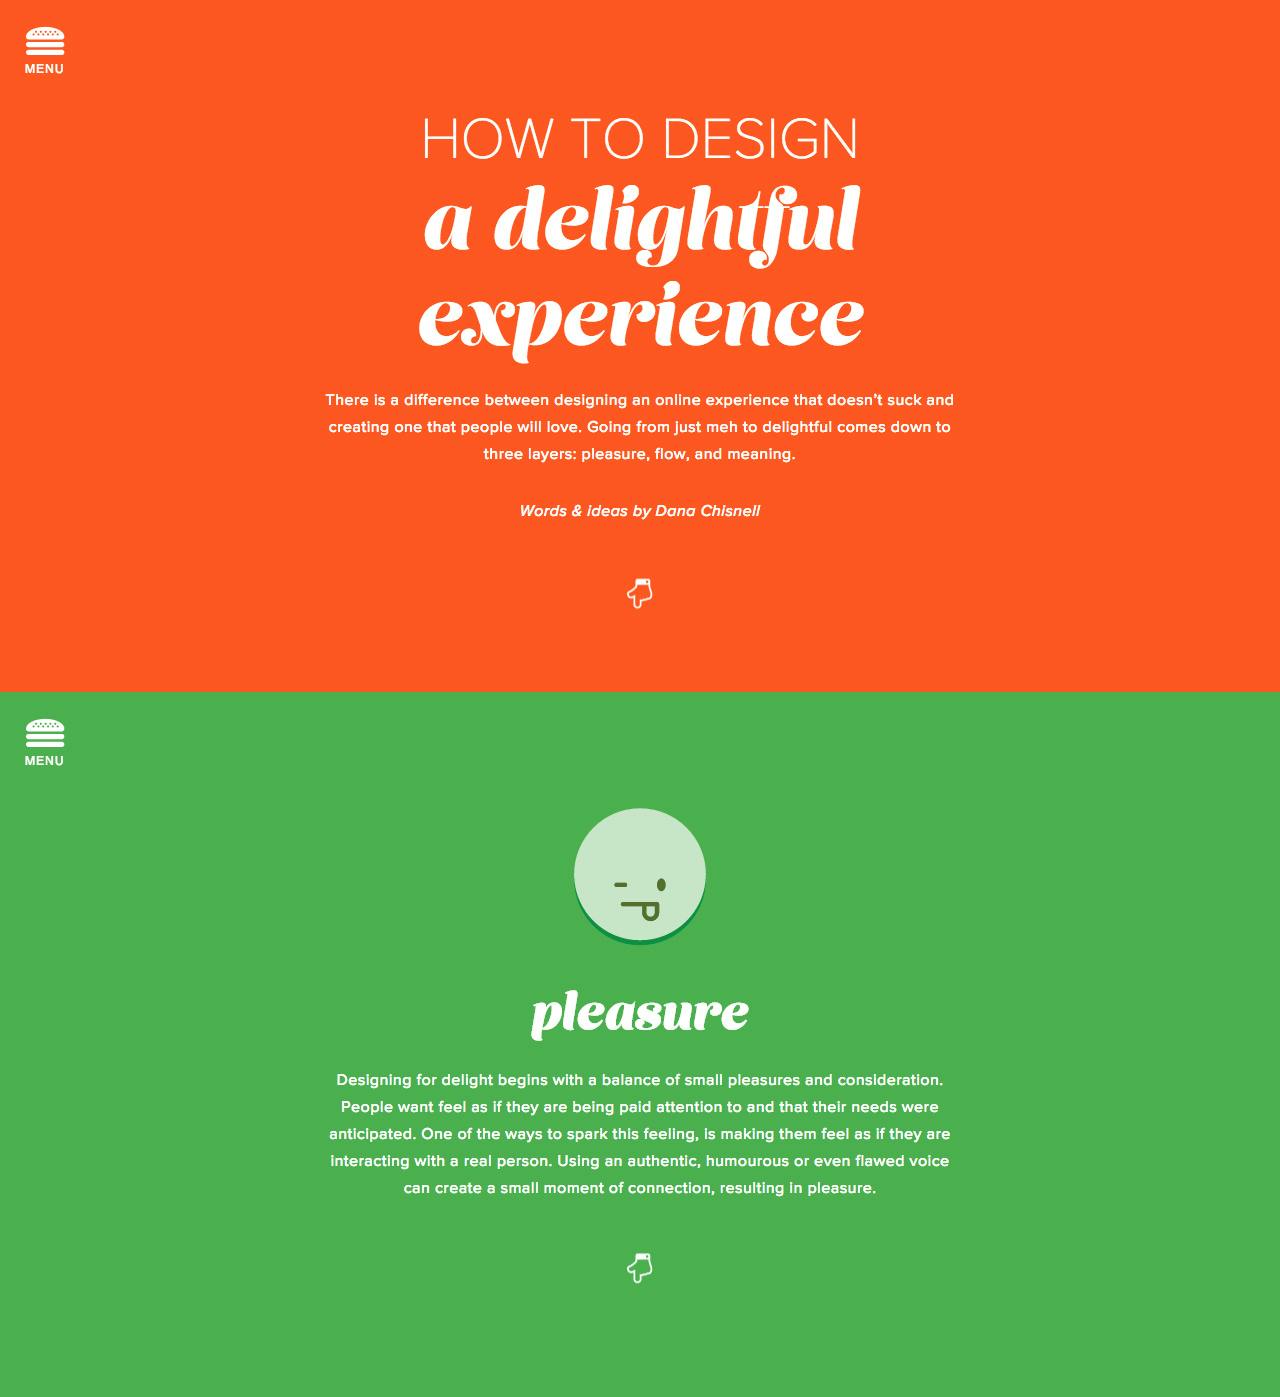 How to Design a Delightful Experience Website Screenshot